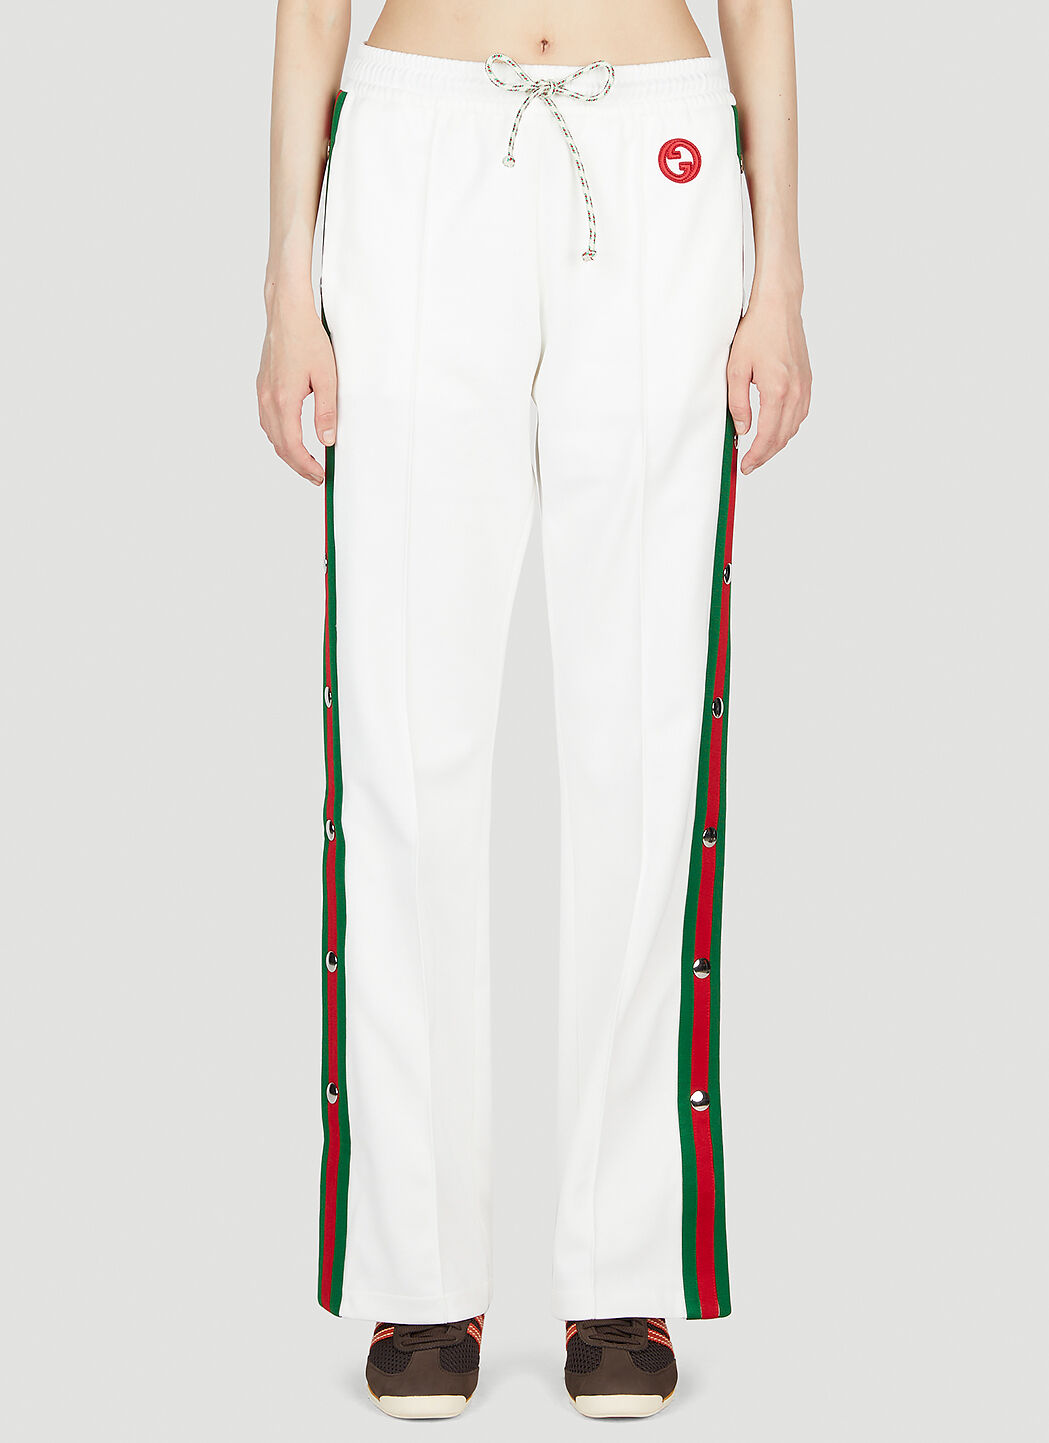 GG technical jersey jogging pant gucci ShopStyle MyShopStyle click link  for more information  Pants for women Fashion Active wear for women